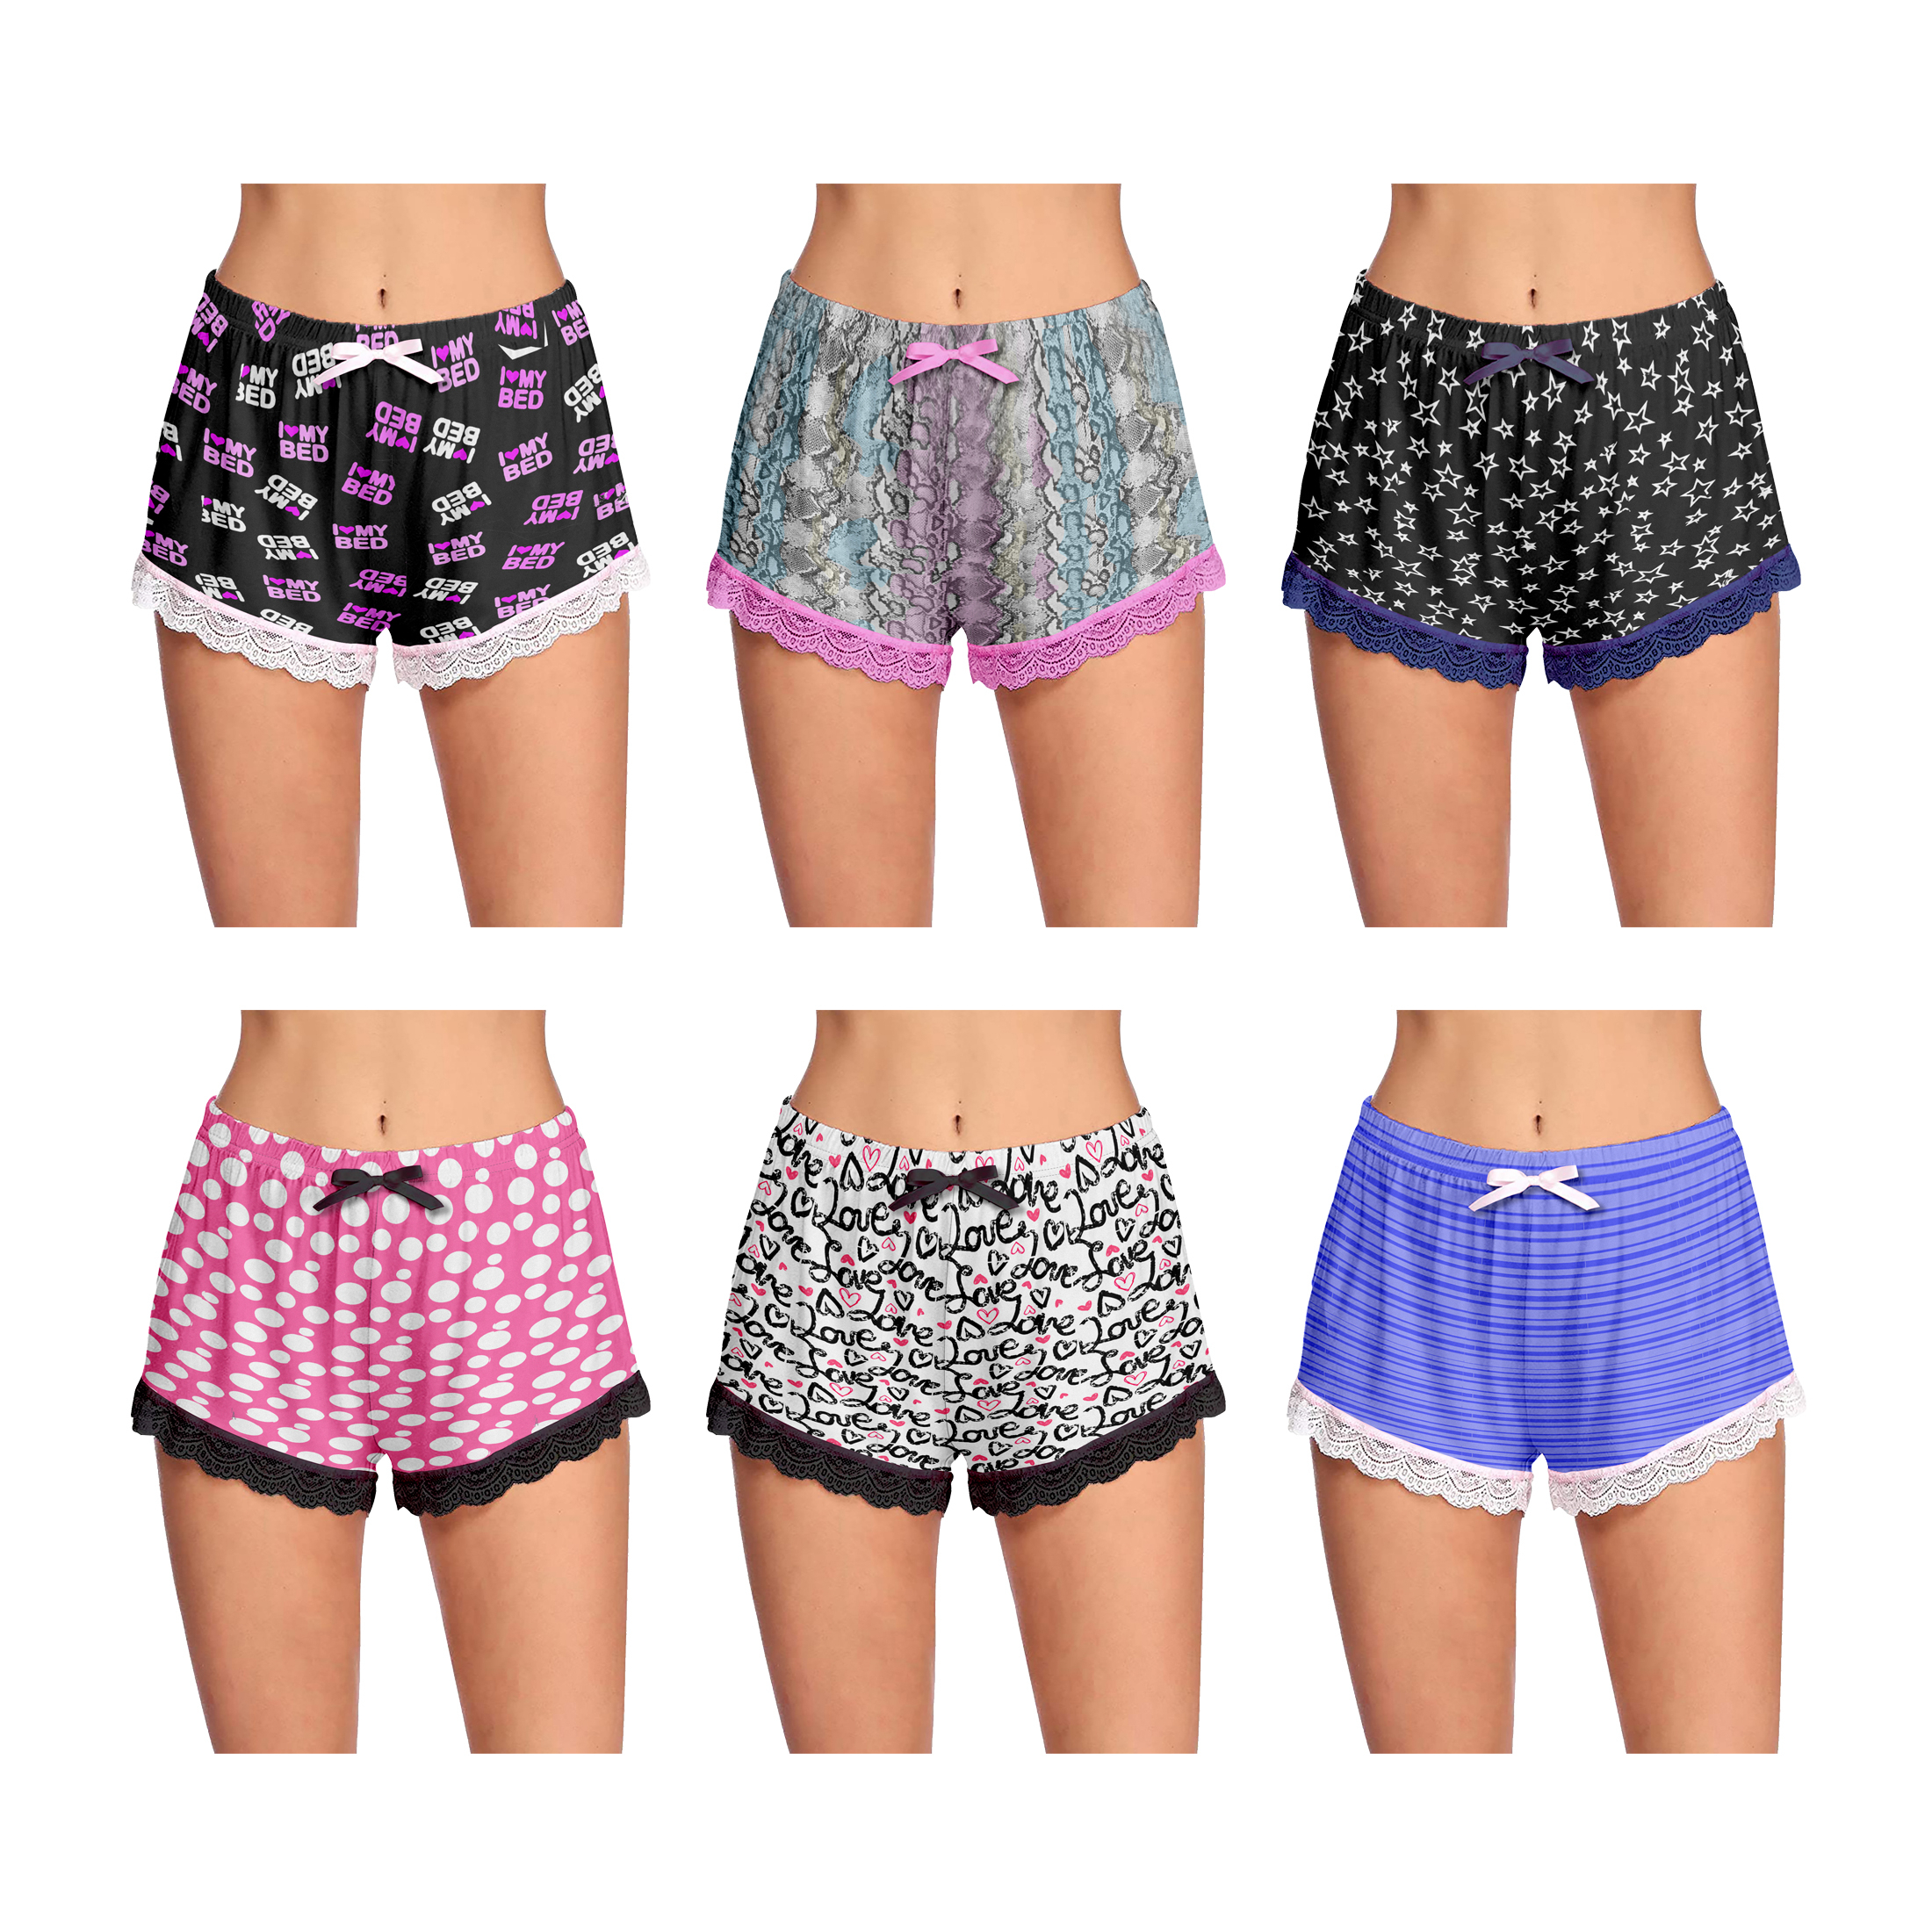 6-Pack Women's Casual Pajama Shorts Stretchy Laced Hem Relaxed Fit Yoga Printed Ladies Bottom - L